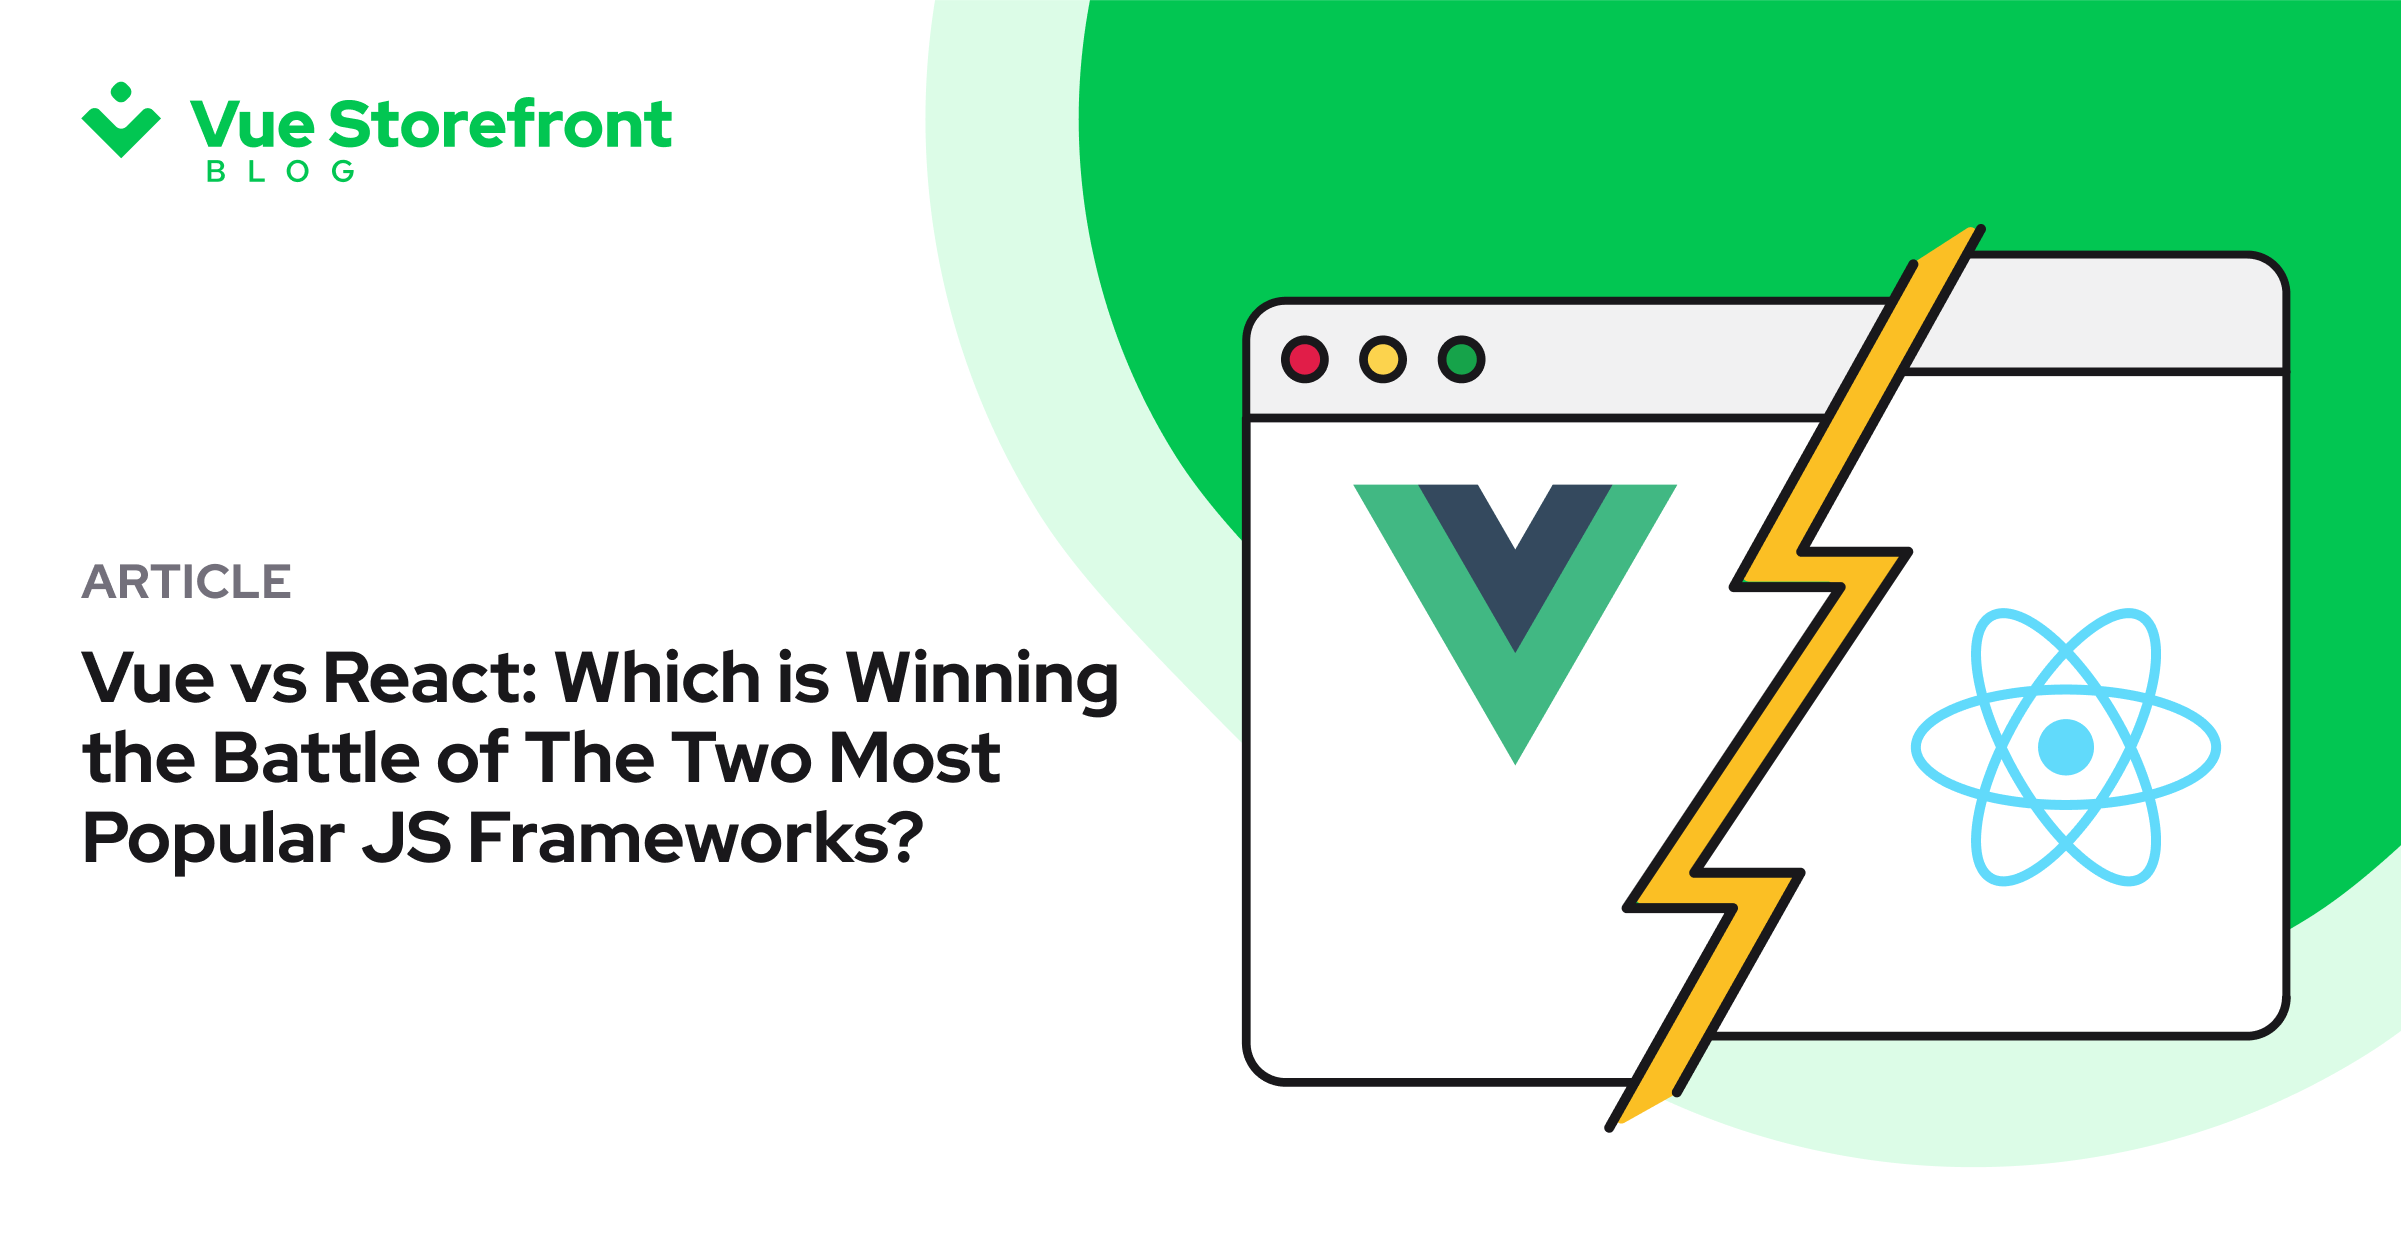 Vue vs React Which Is Winning the Battle? Vue Storefront